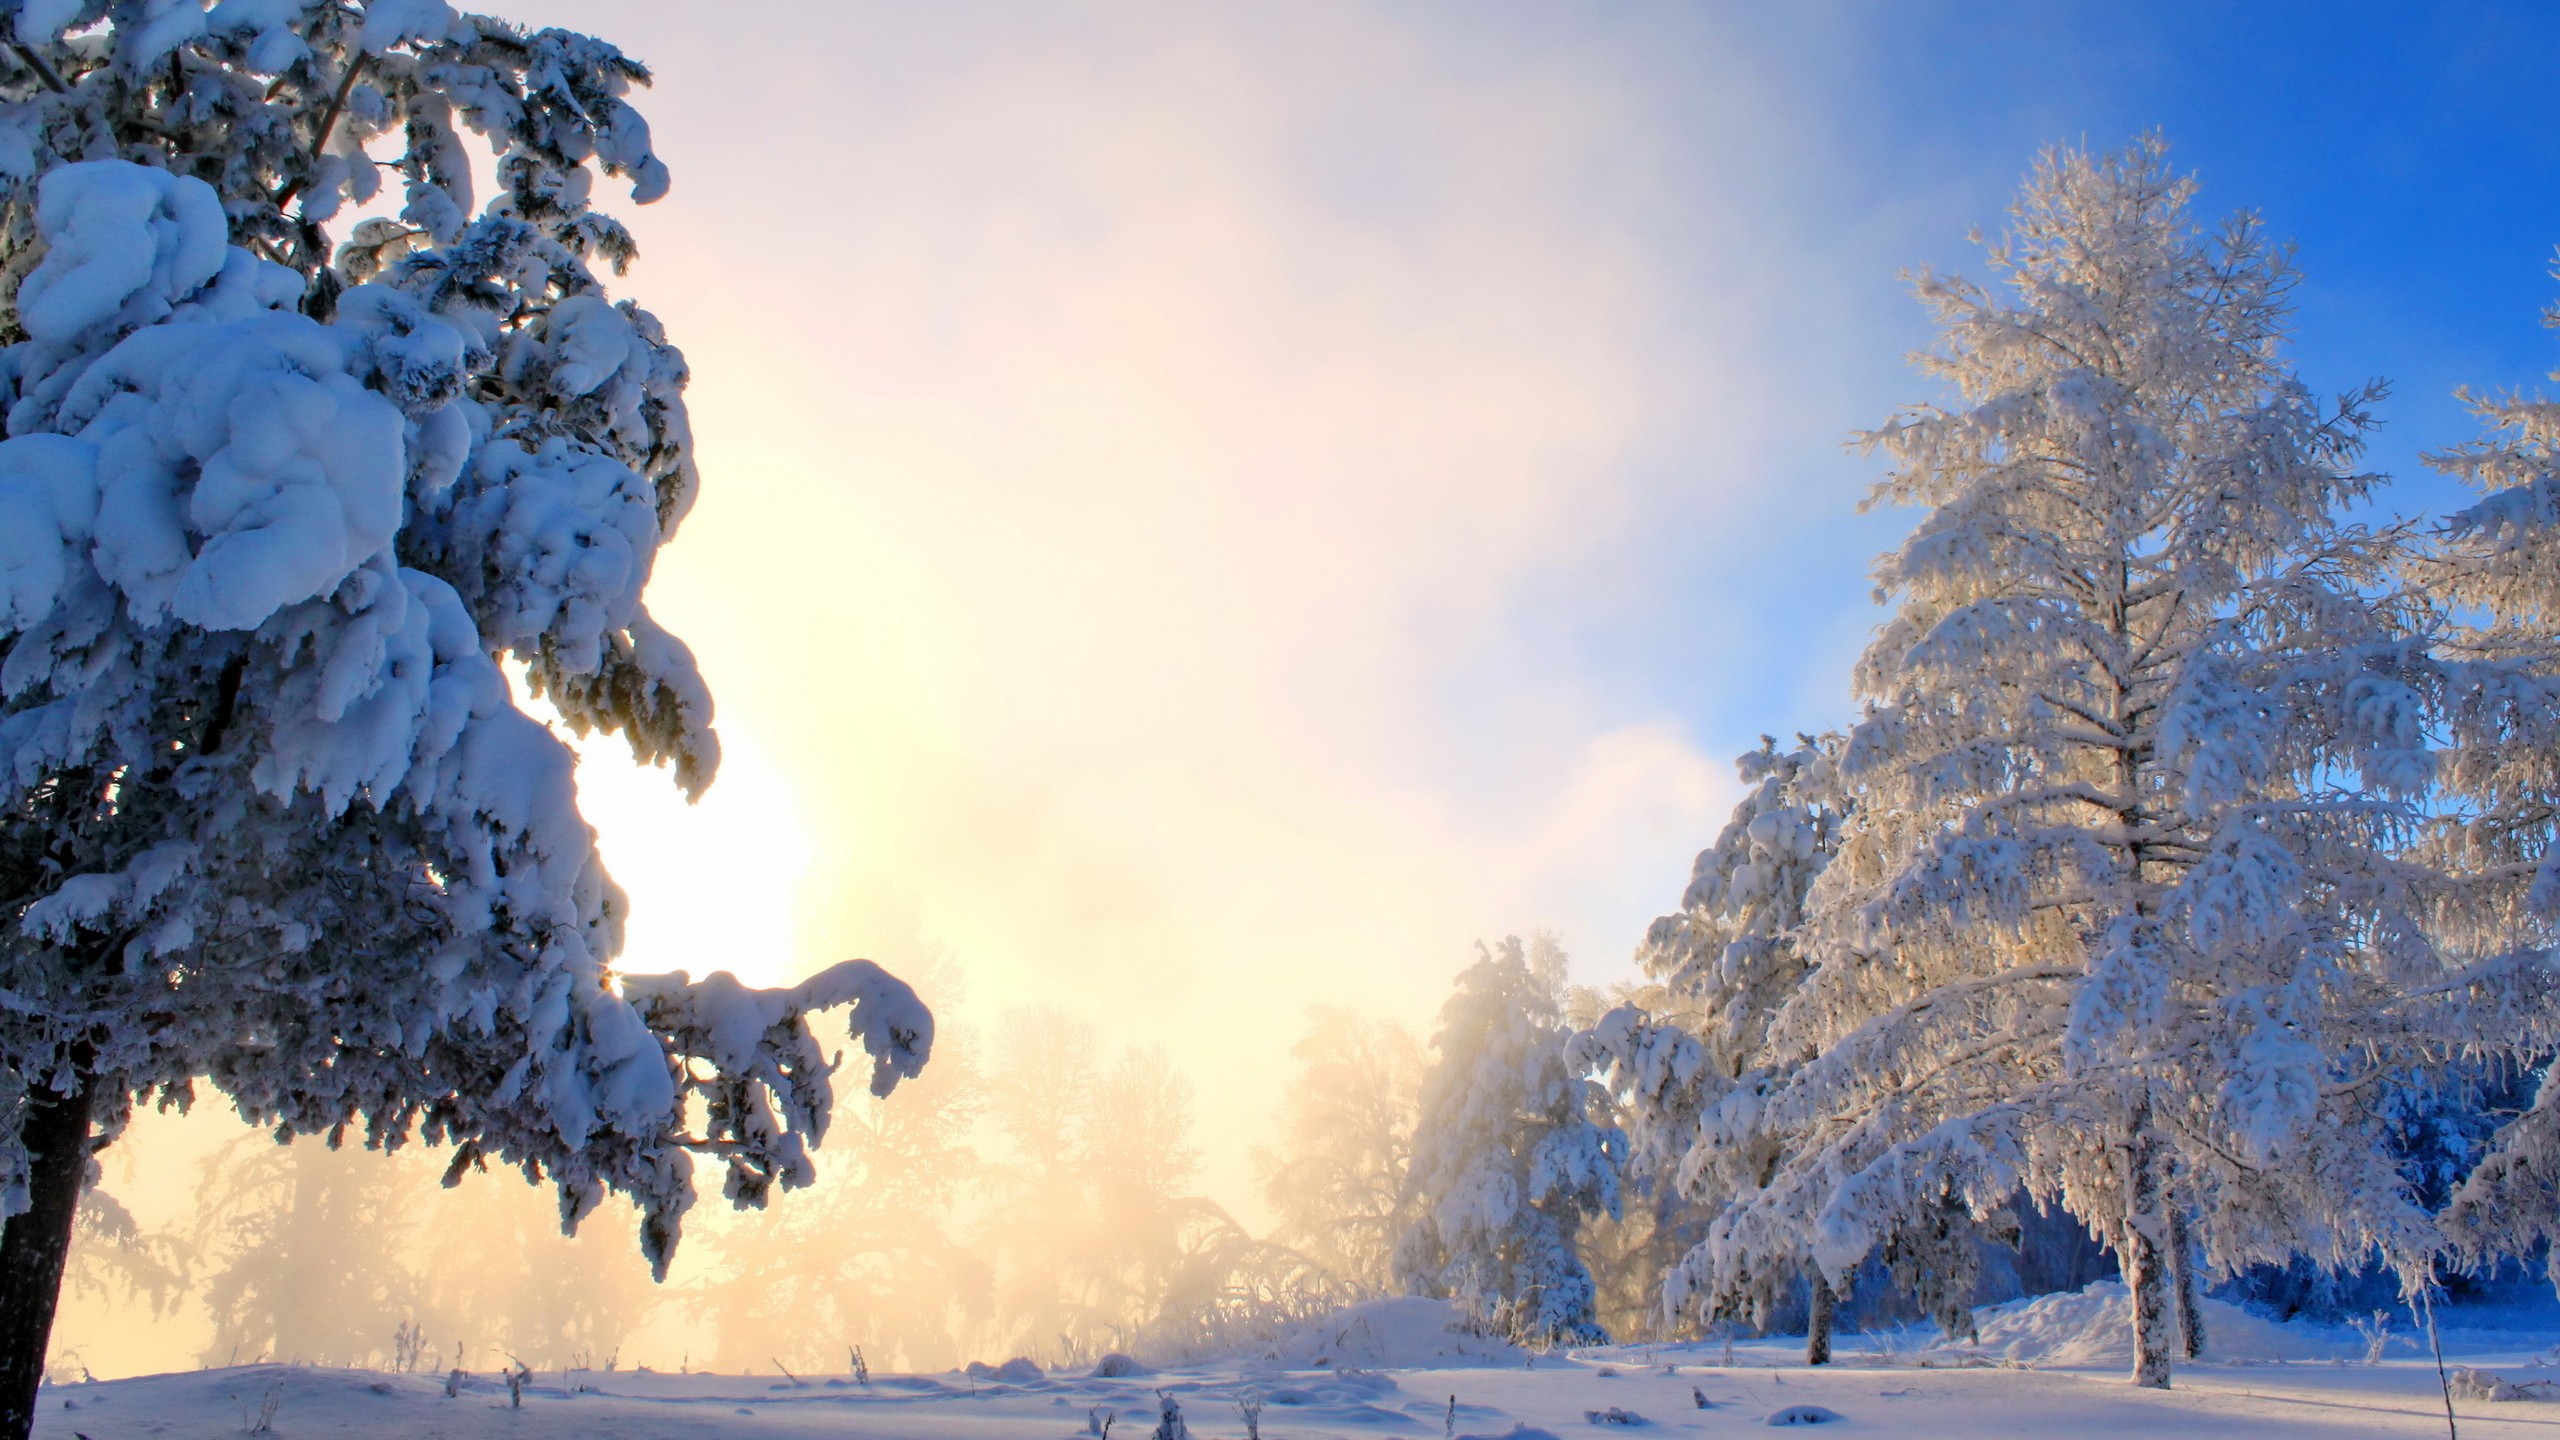 General 2560x1440 nature snow trees winter sunlight cold ice outdoors